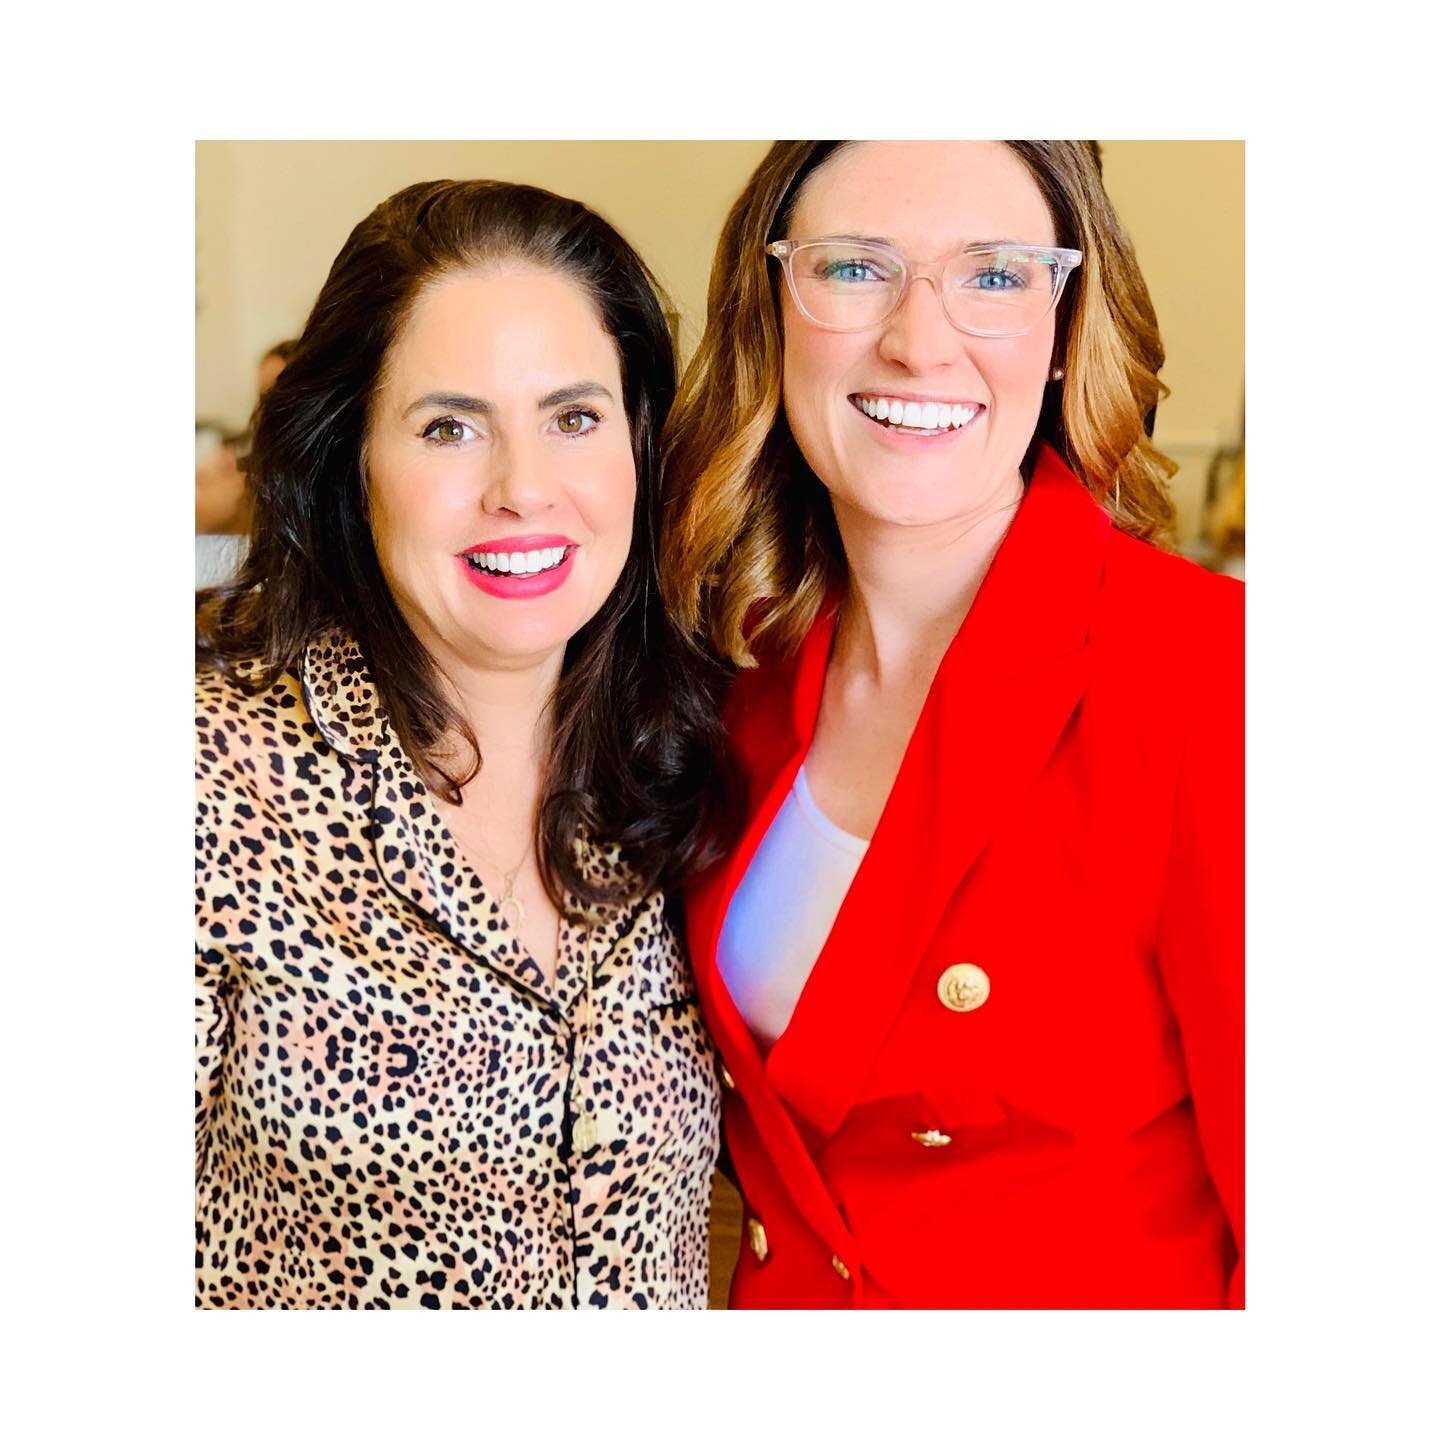 Gold Coast media = THE BEST. 

Loved catching up with this beauty @amelia_adam who was covering the tech neck phenomenon with @posture_form + @quantumhealingoxenford. 

And how good is Amelia&rsquo;s red jacket? ❤️